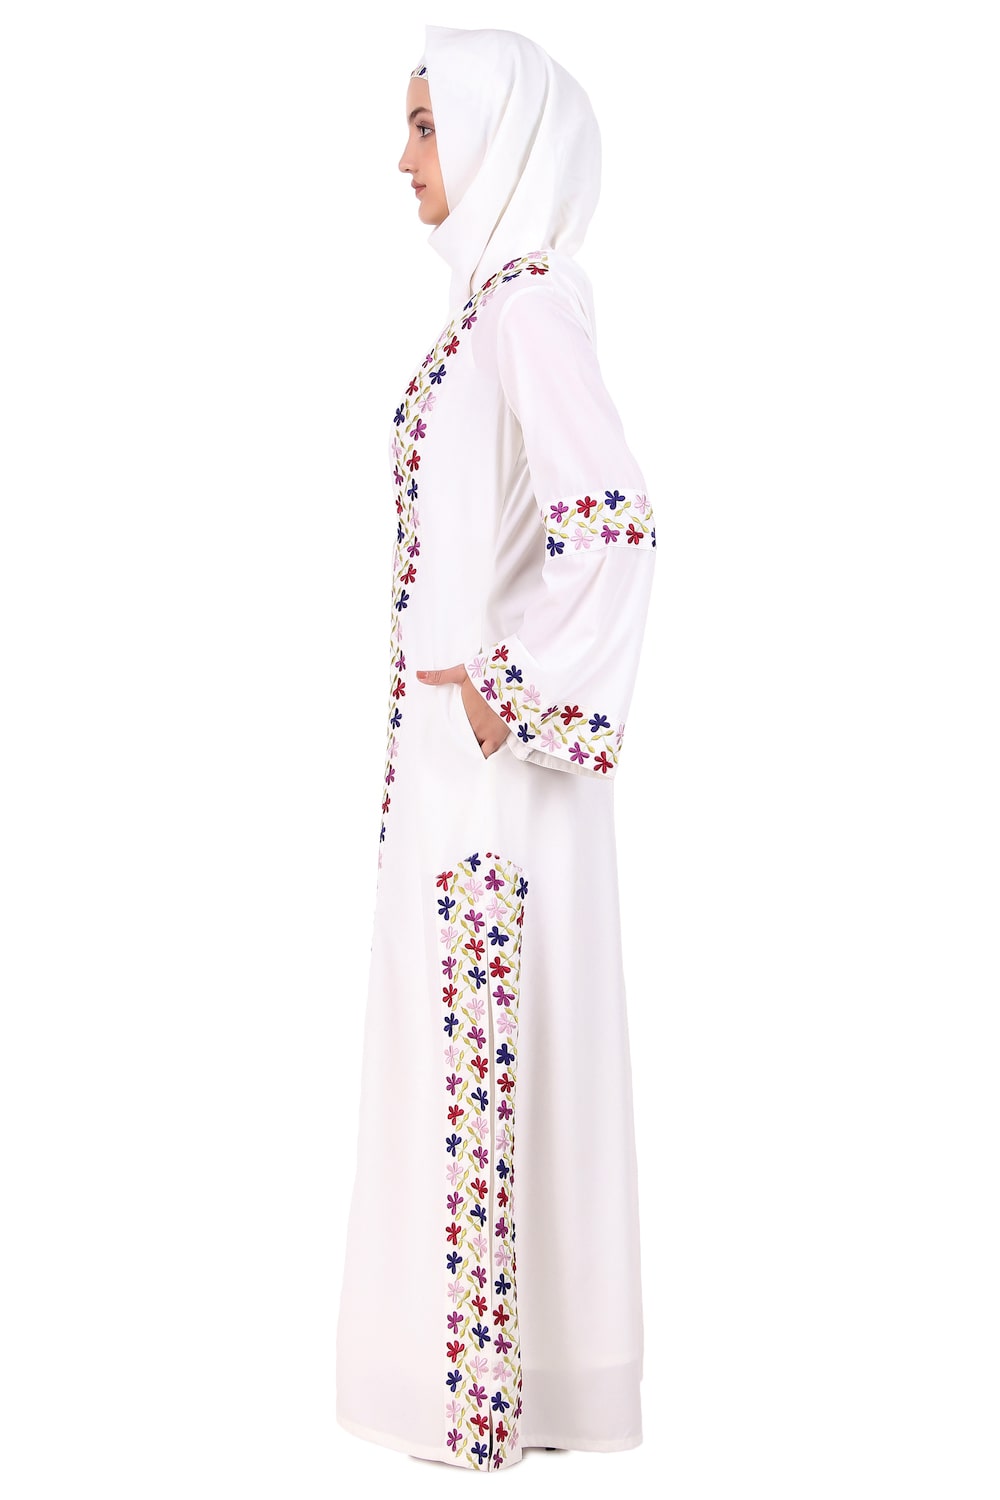 Heavy Embroidered Front Open White Abaya